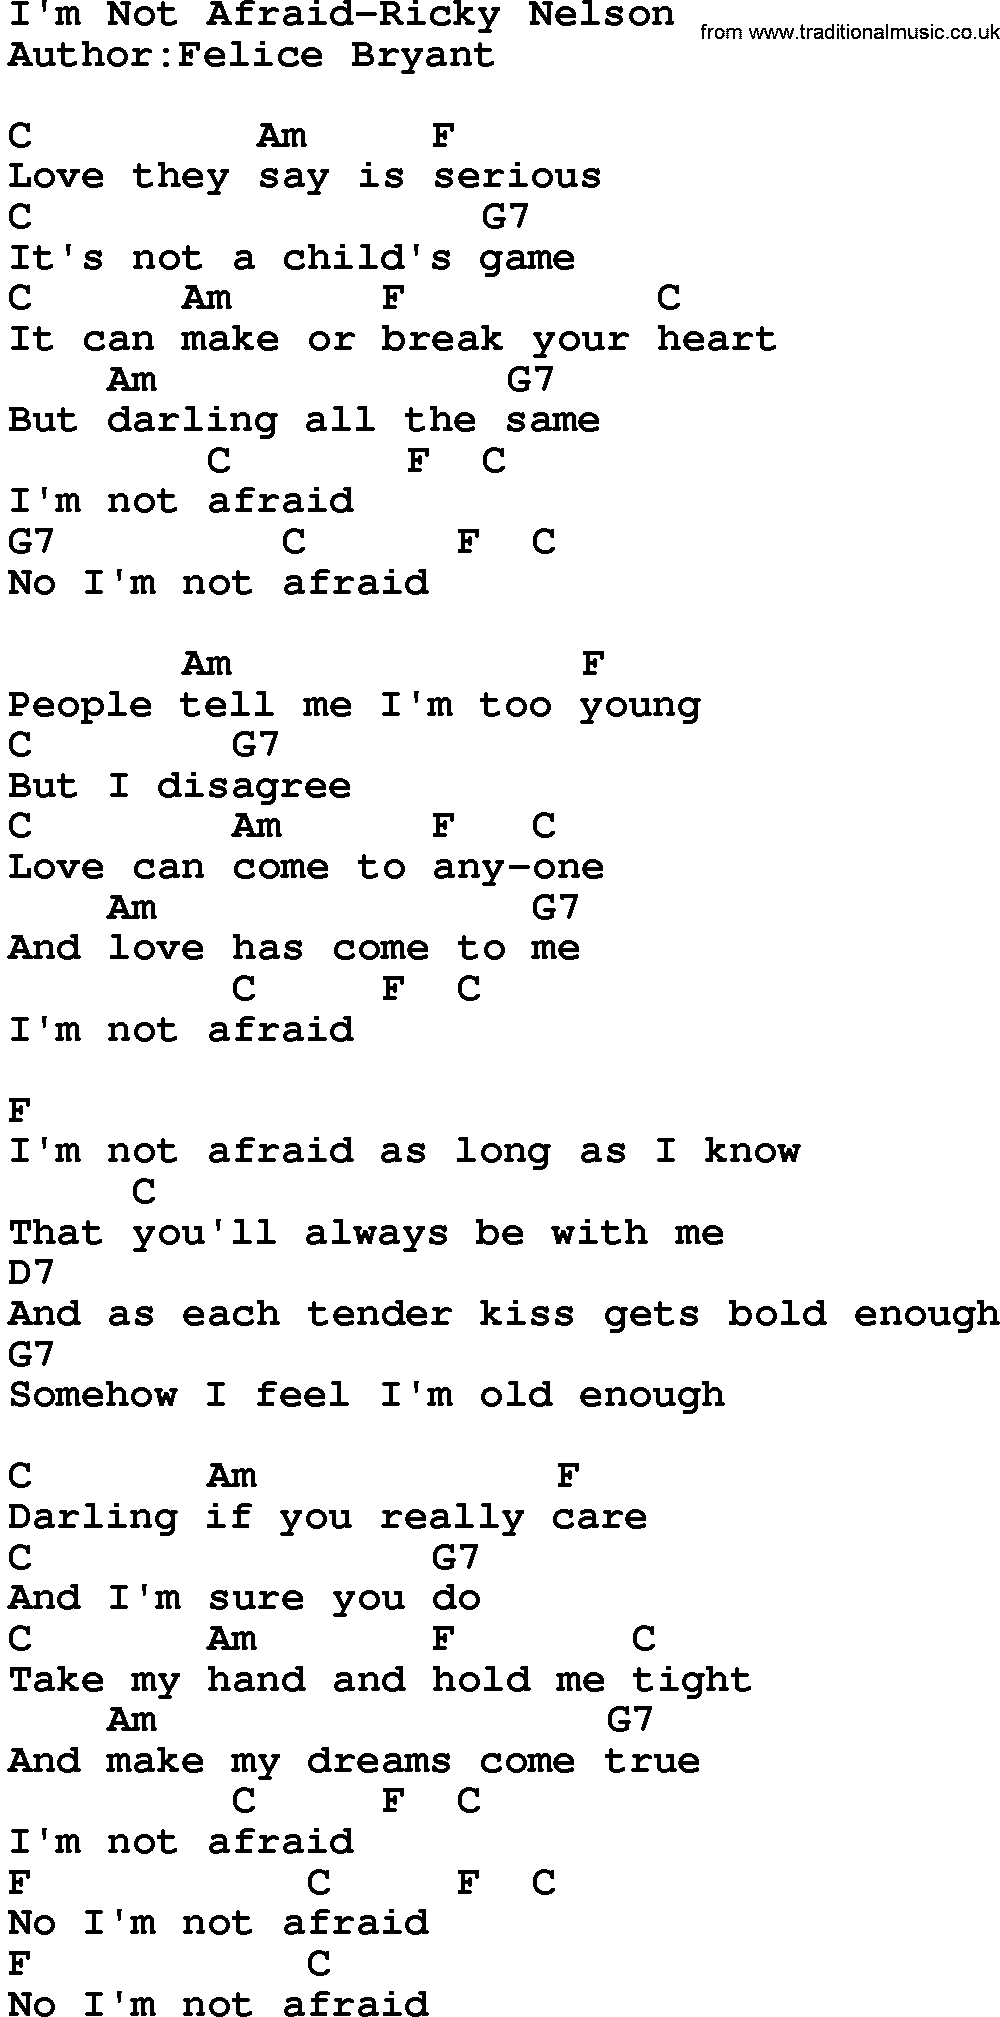 Country music song: I'm Not Afraid-Ricky Nelson lyrics and chords